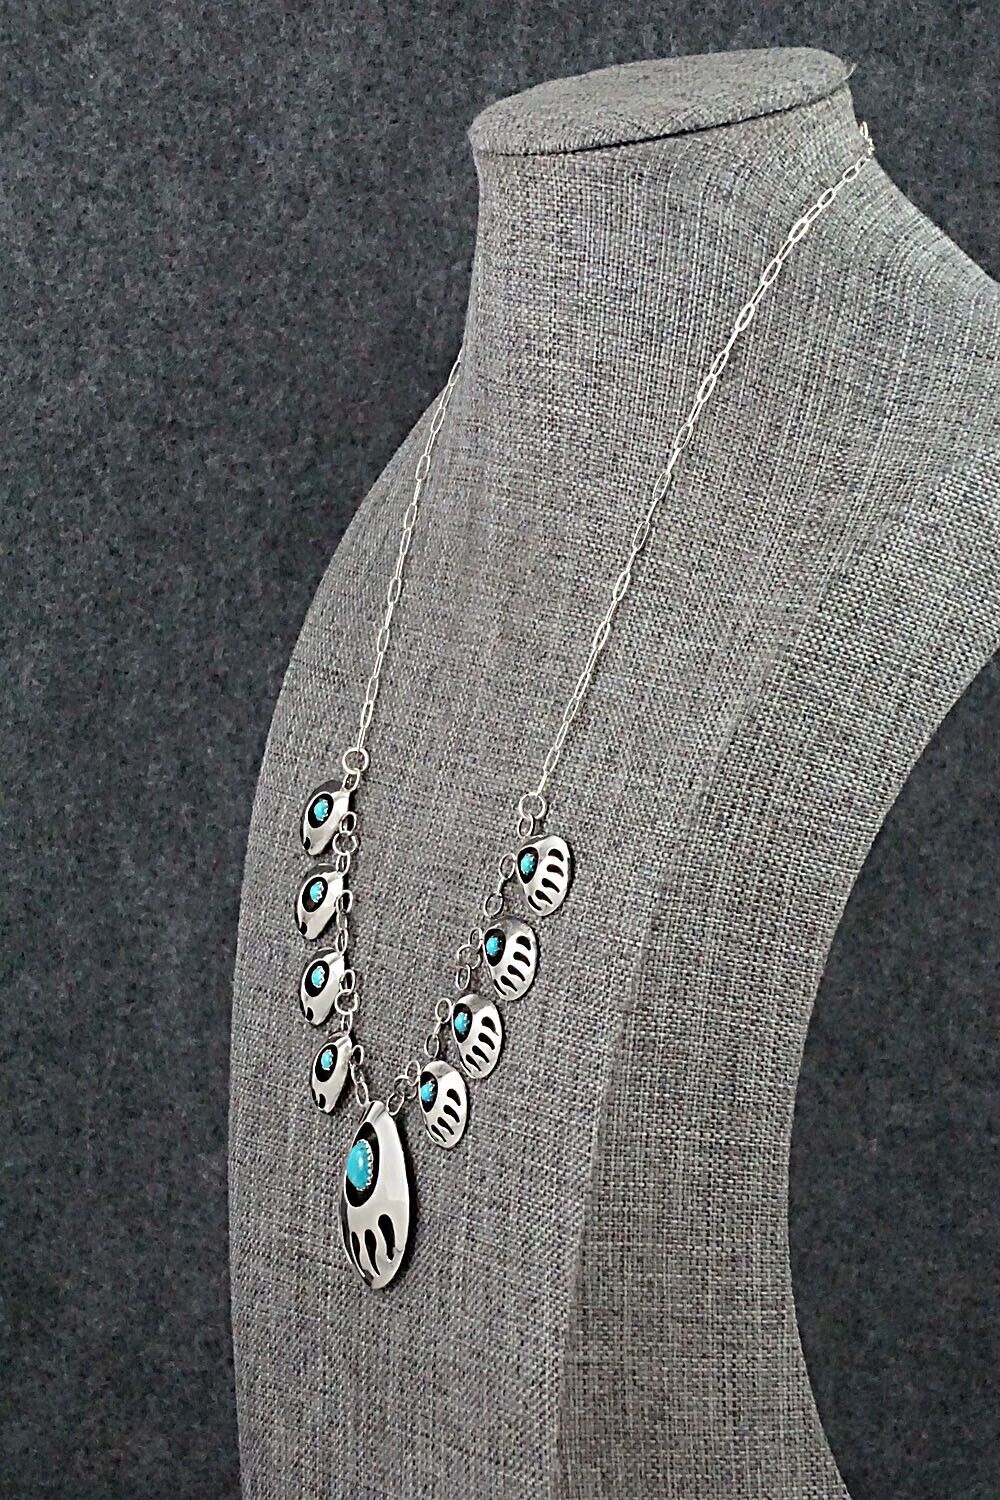 Turquoise & Sterling Silver Necklace - Leroy Parker